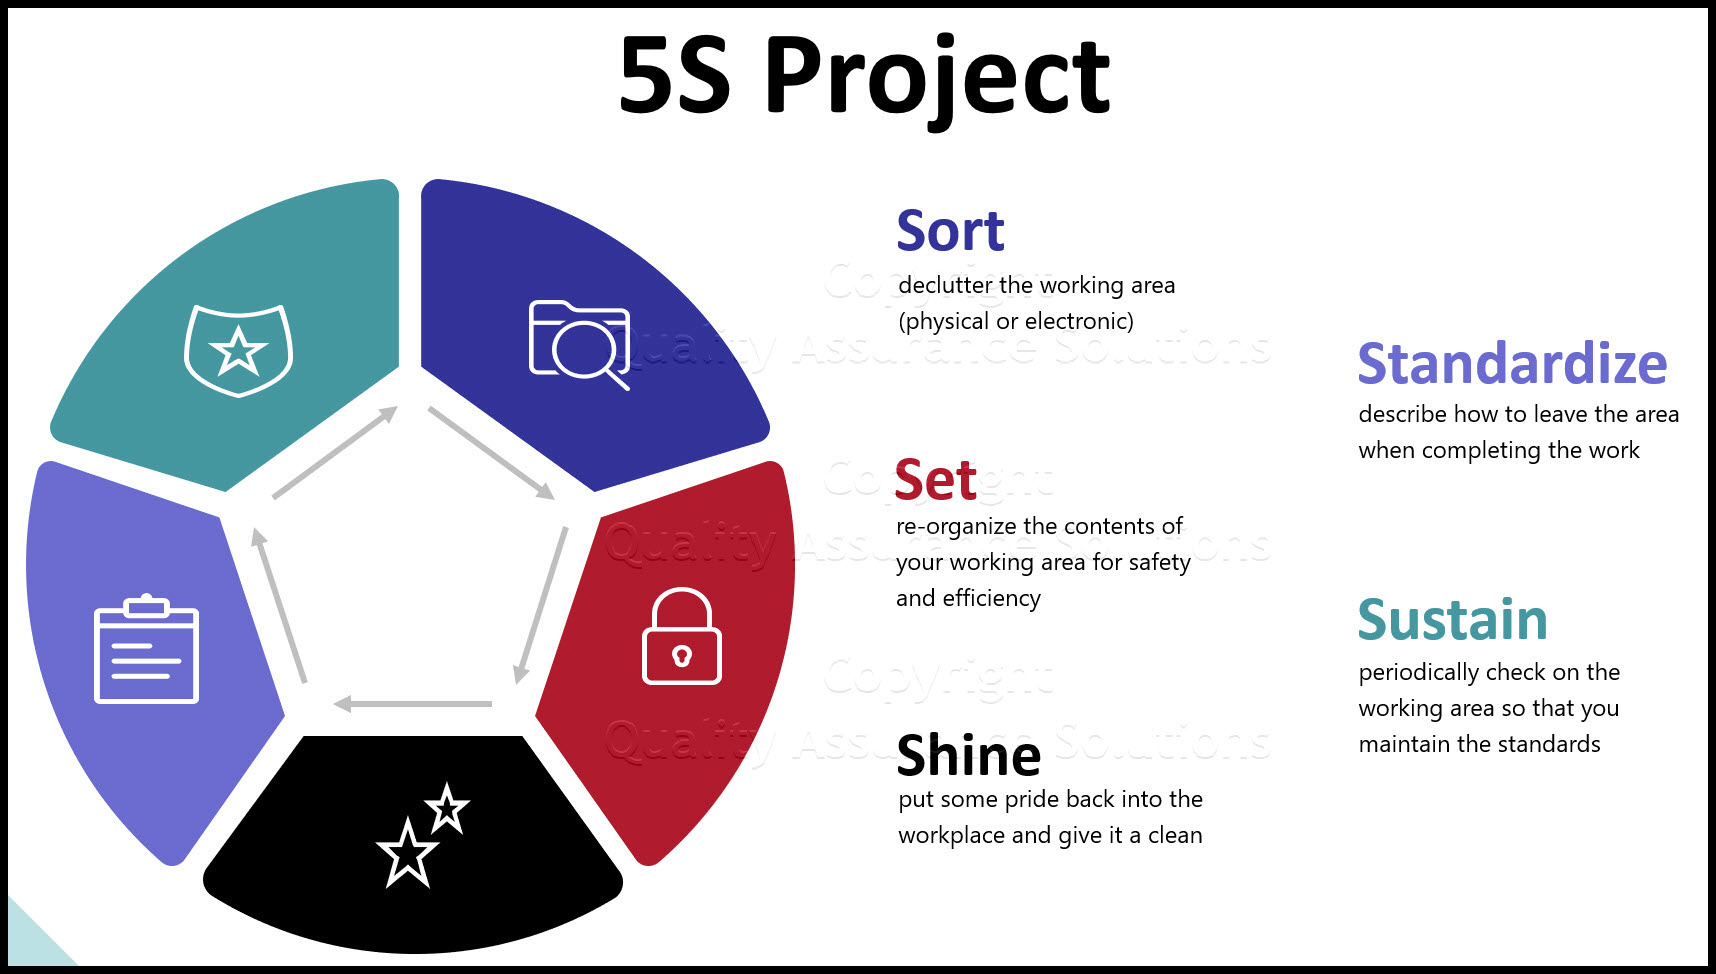 Your 5S Project and Using PDCA Complete